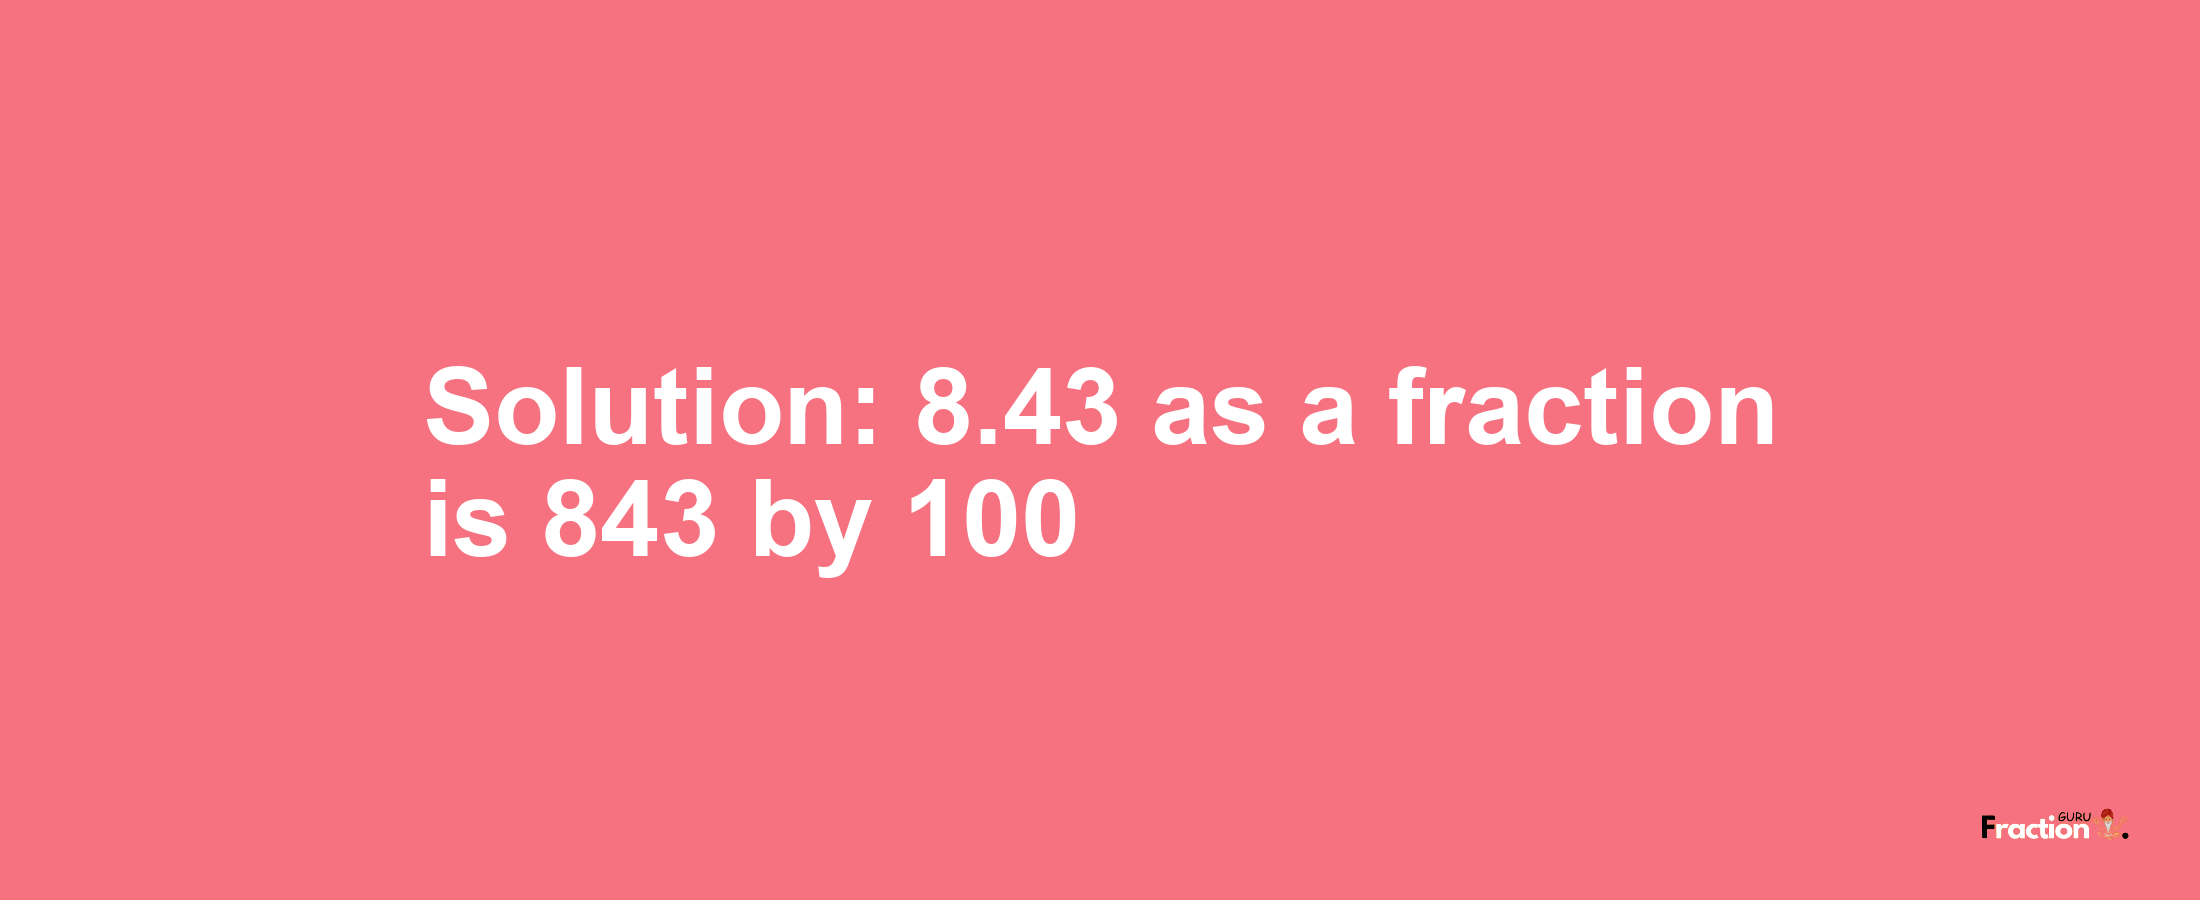 Solution:8.43 as a fraction is 843/100